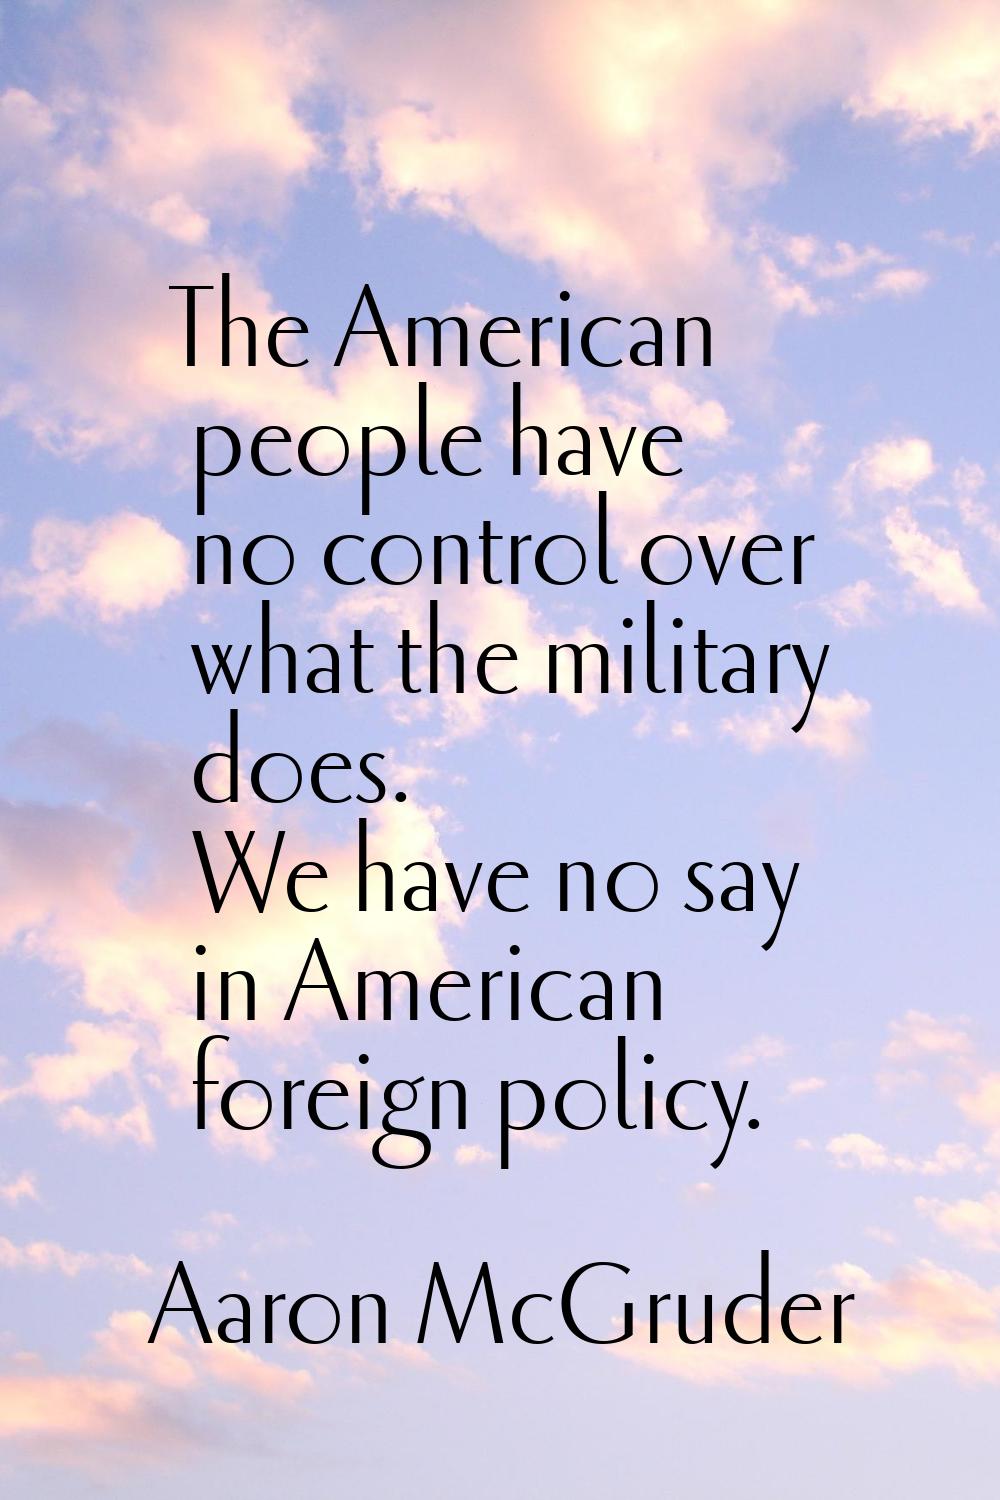 The American people have no control over what the military does. We have no say in American foreign